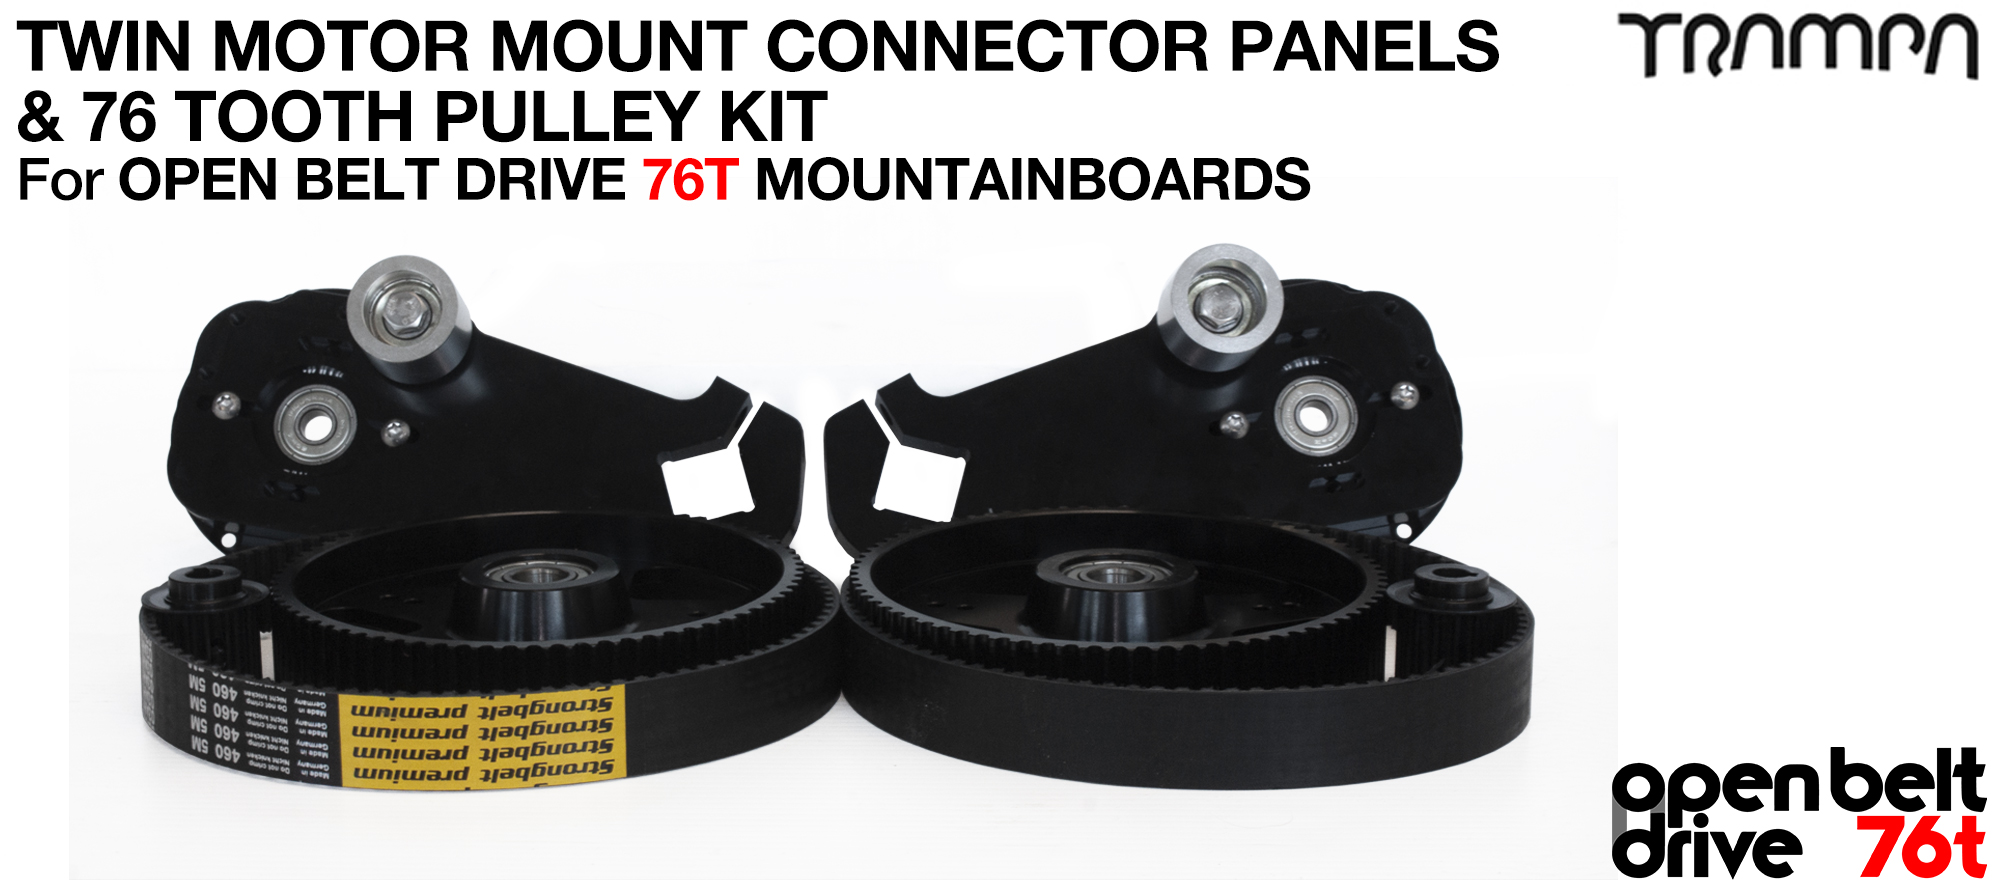 76t OBD MM Panel & 76T Pulley kit (+£190)